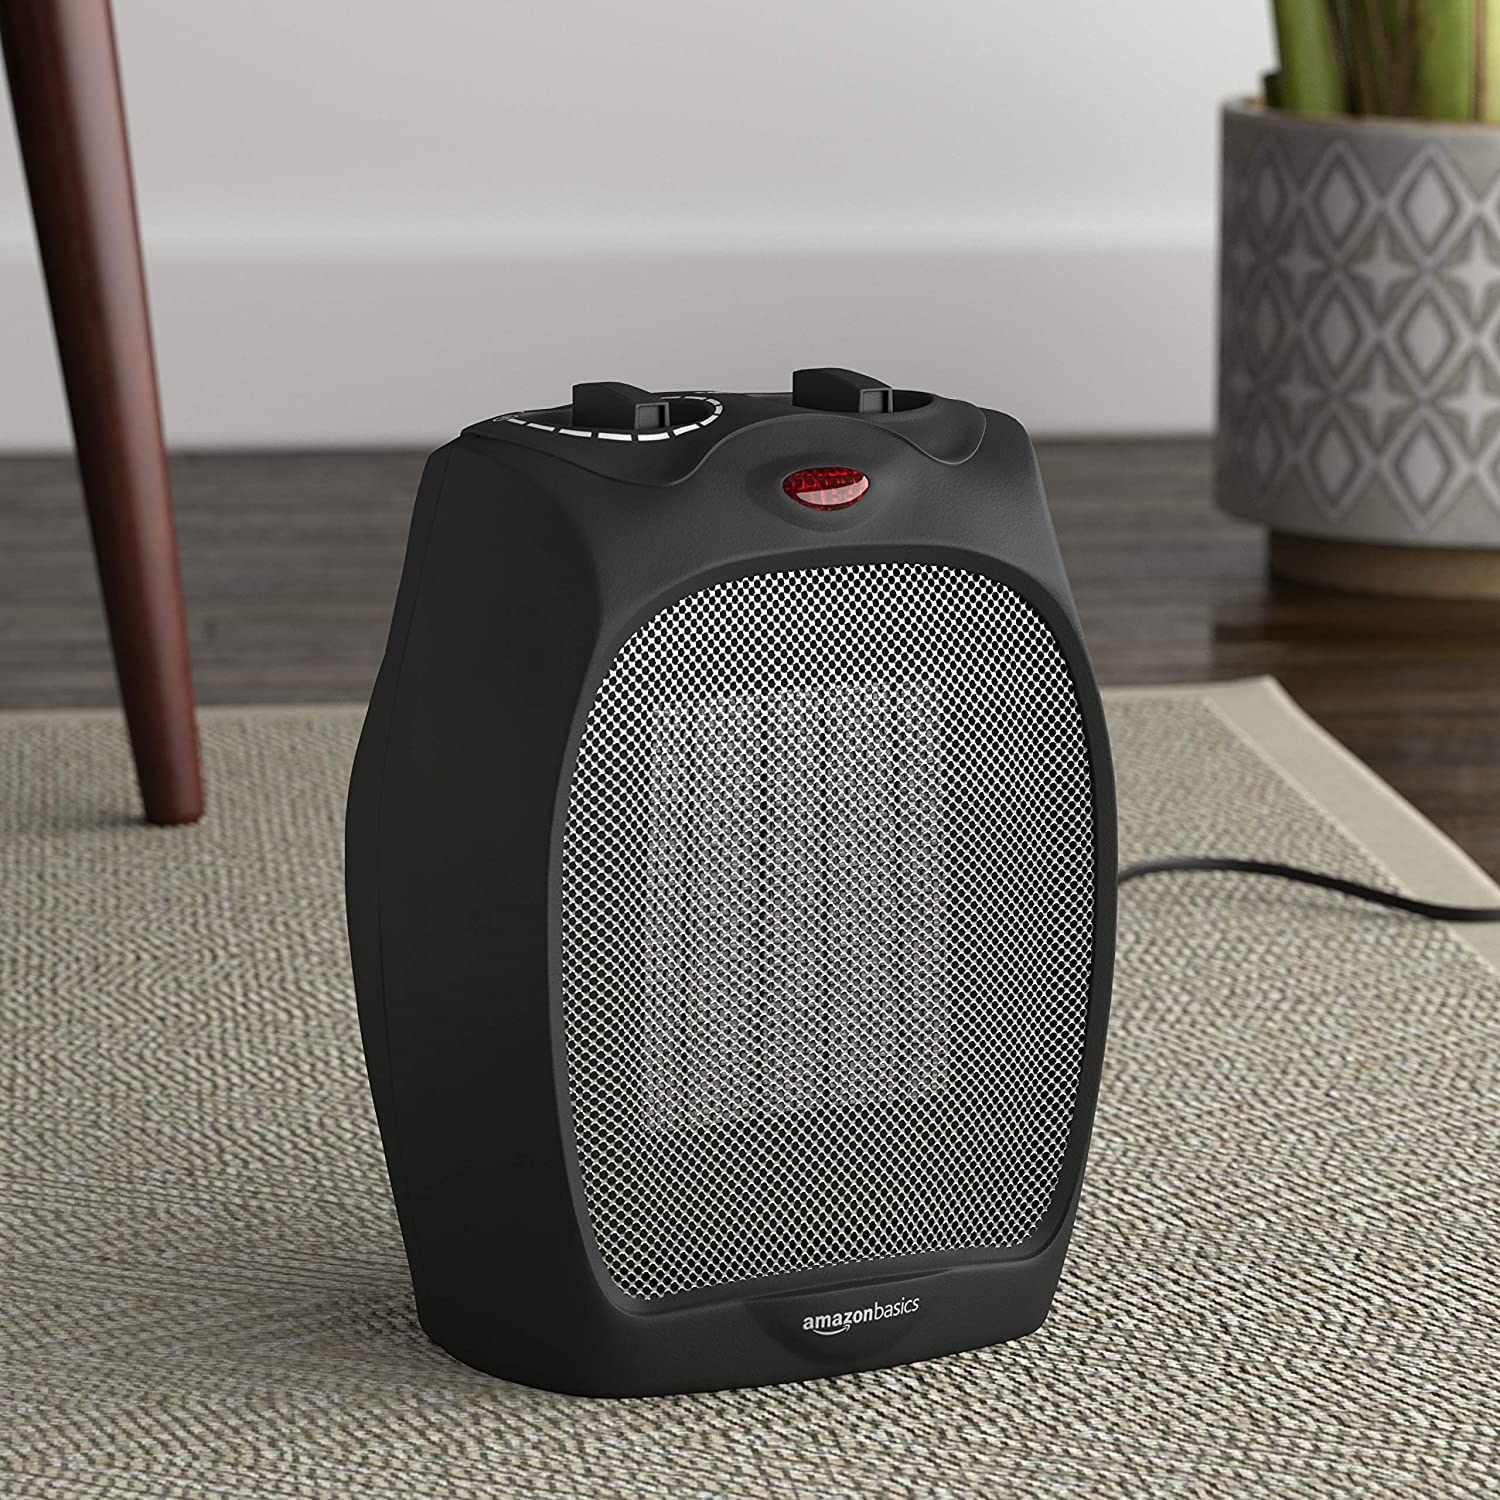 The space heater on a carpet with a plant and table leg in the background